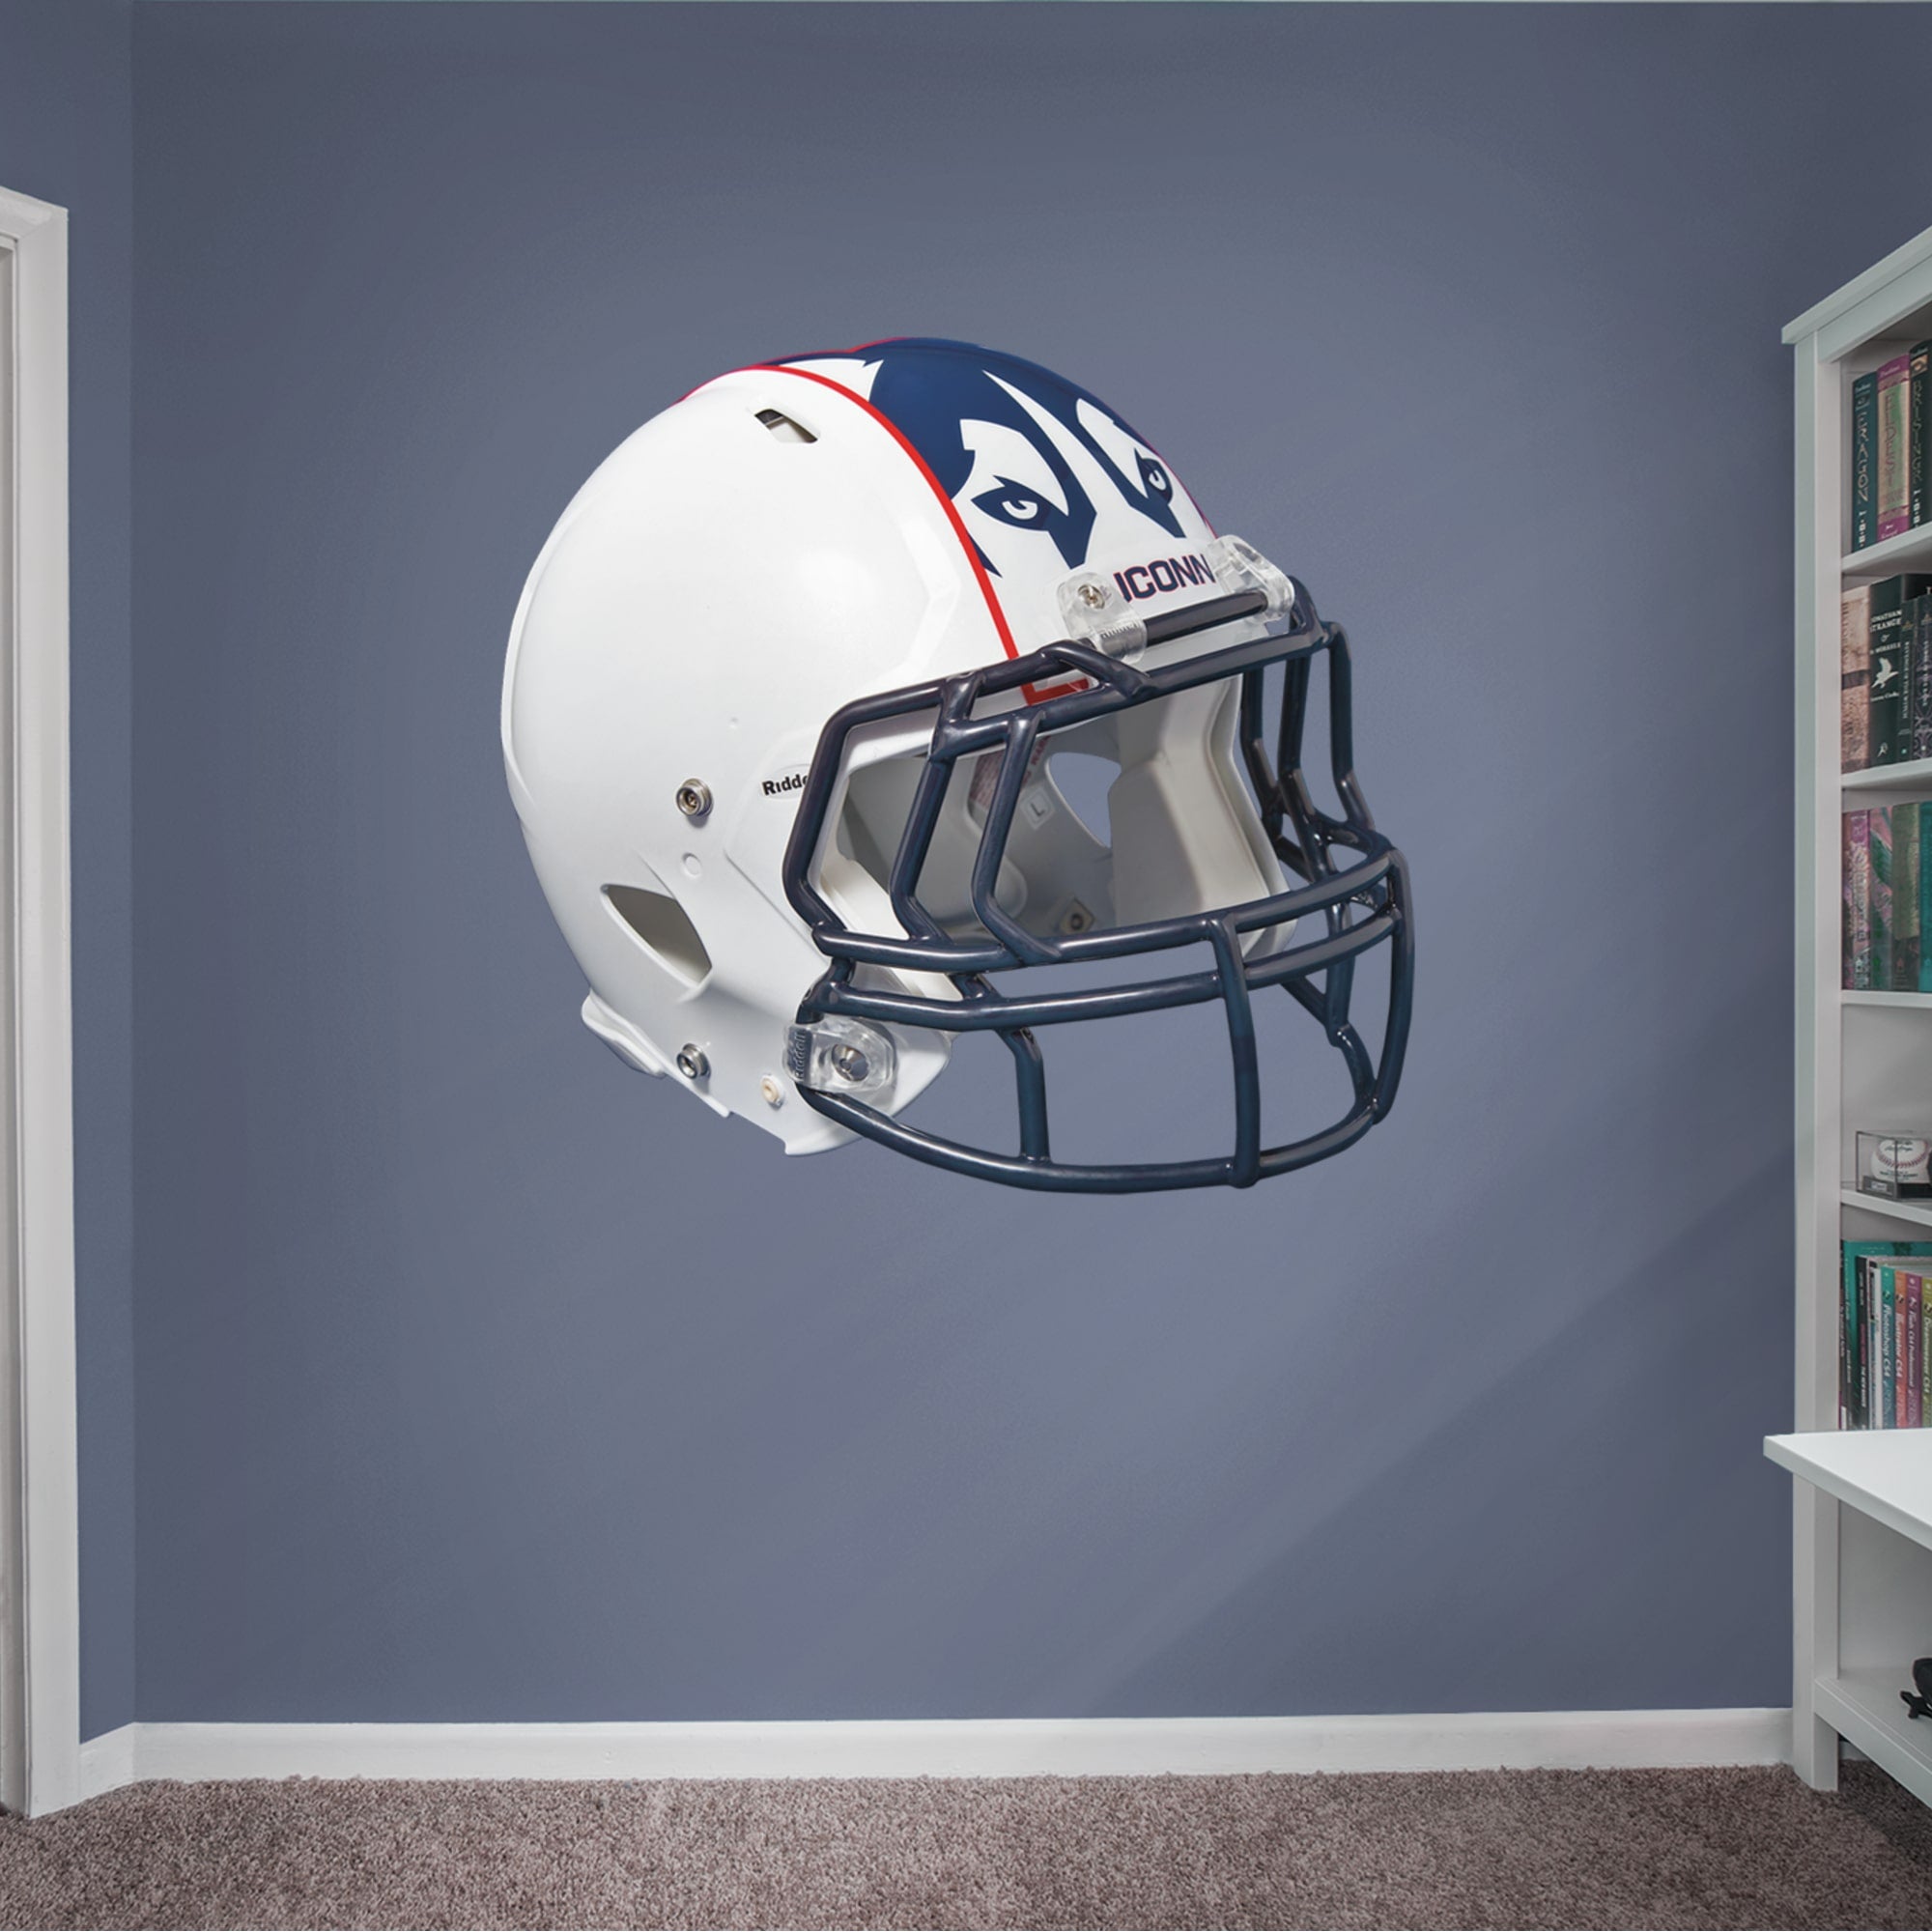 UConn Huskies: Helmet - Officially Licensed Removable Wall Decal 50.0"W x 48.0"H by Fathead | Vinyl